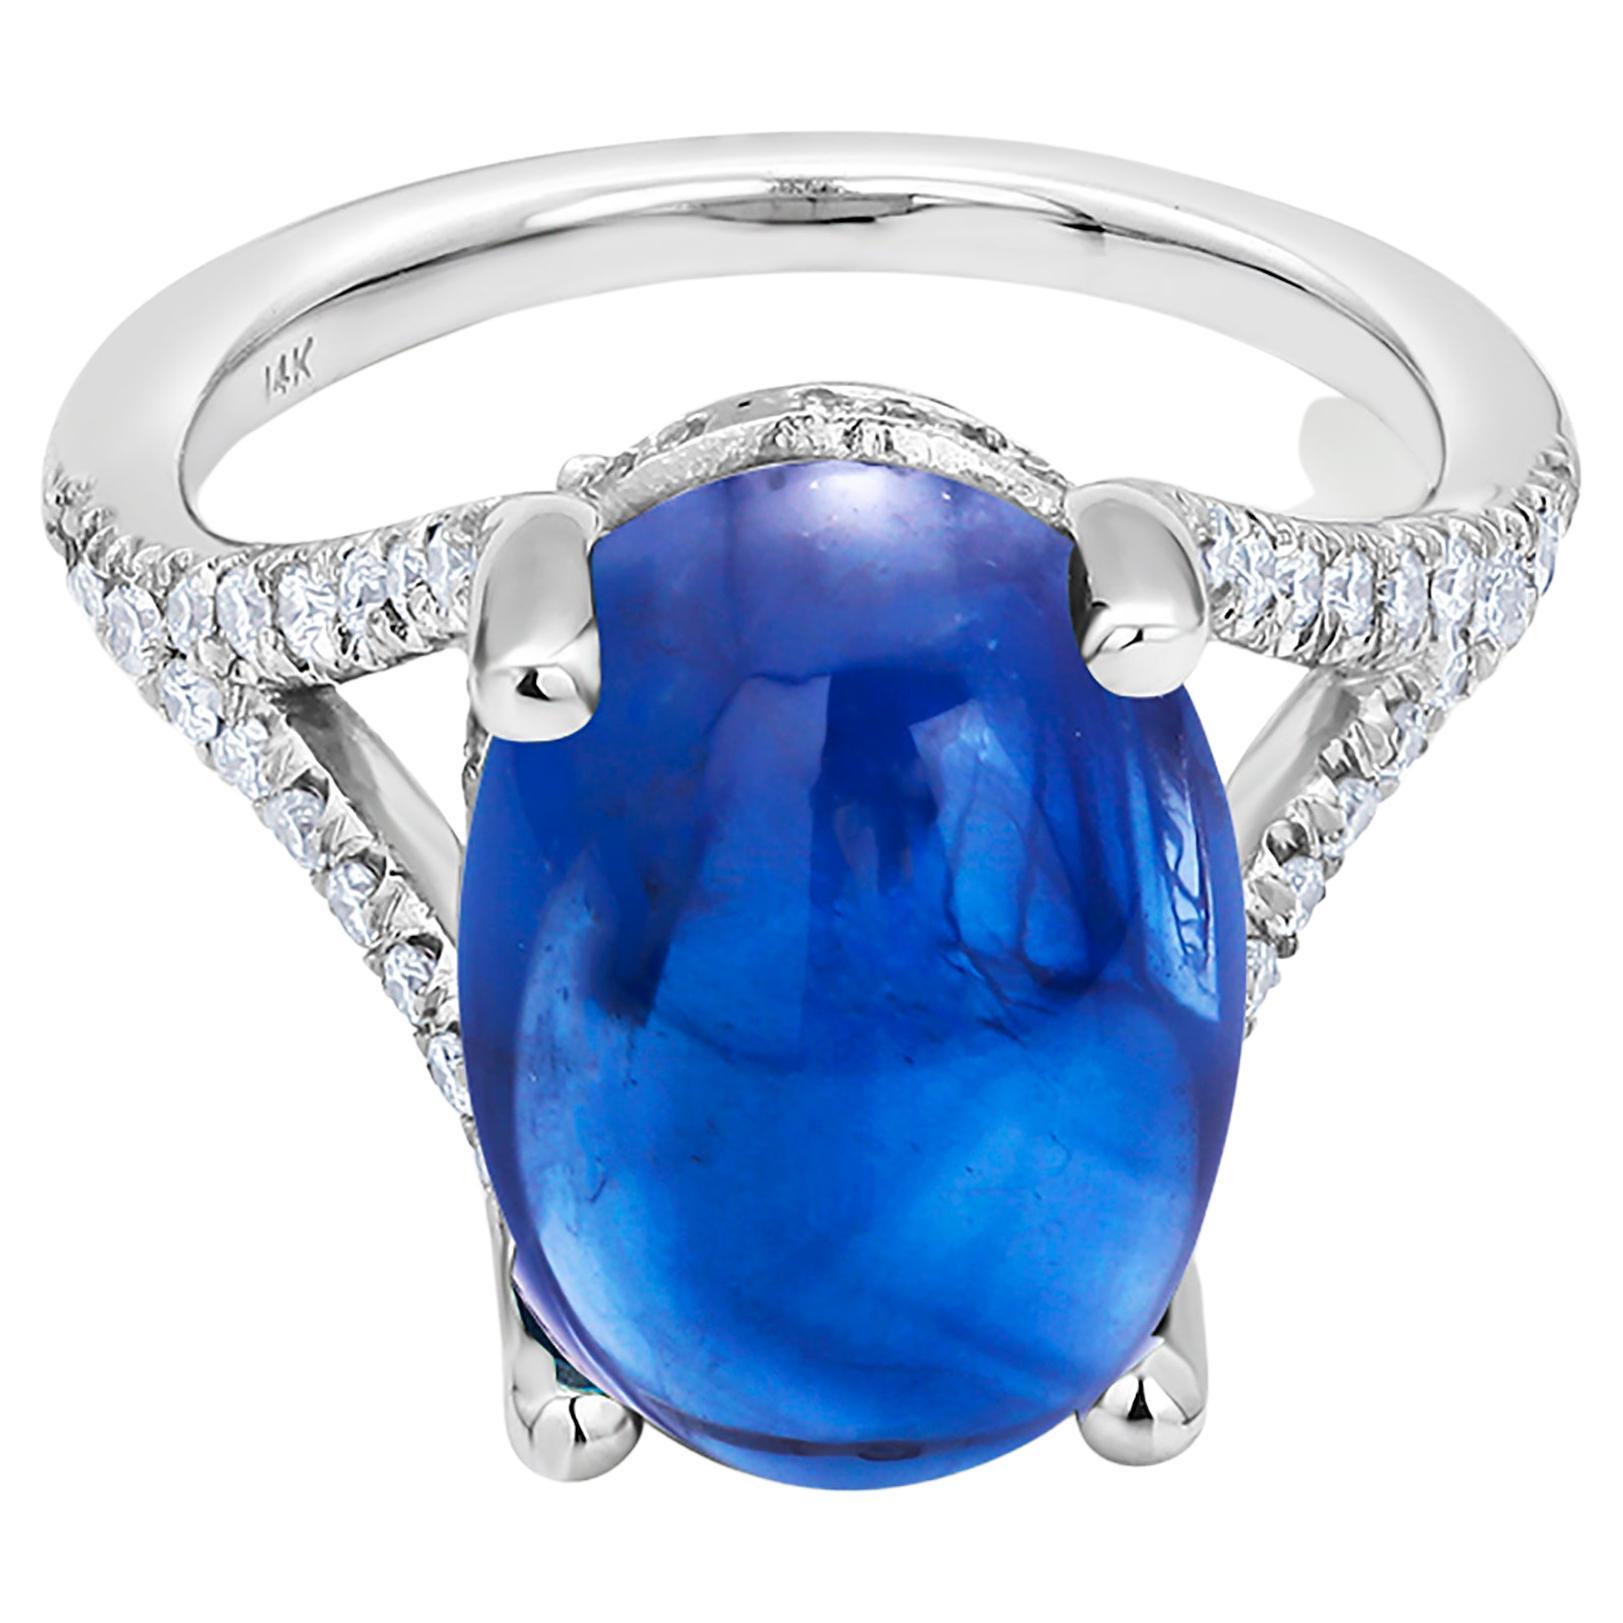 Ceylon Cabochon Sapphire Diamond Gold Cocktail Ring Weighing 17.77 Carats